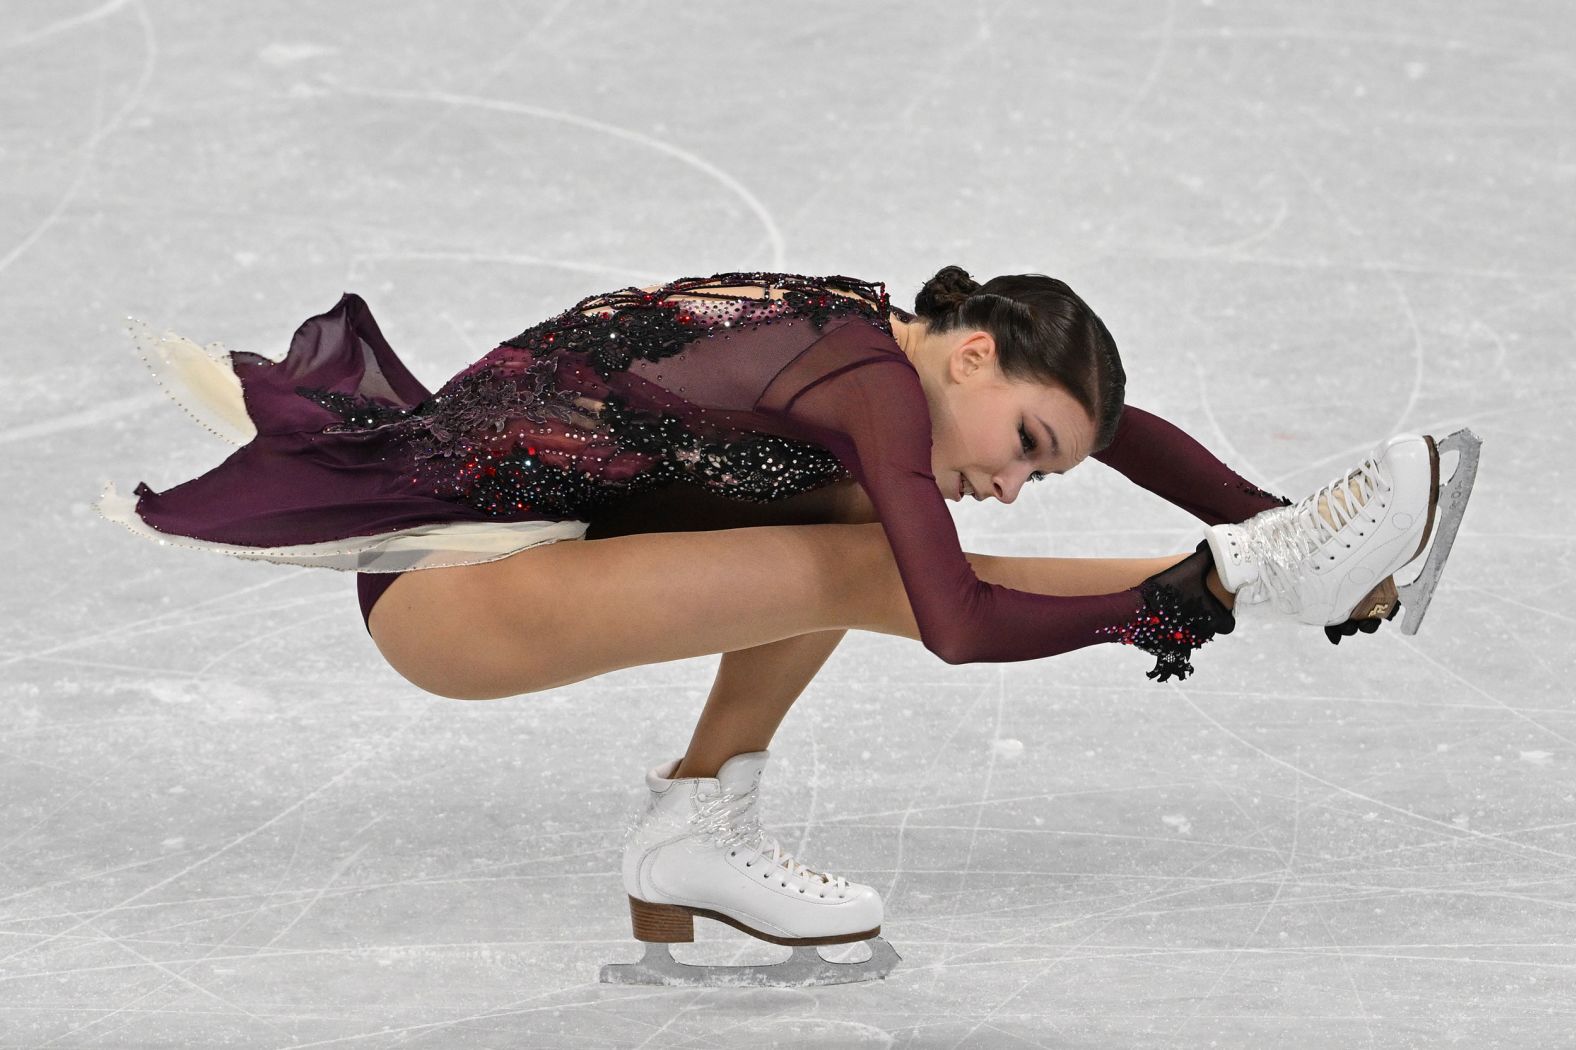 Russian figure skater Anna Shcherbakova performs her free skate on February 17. <a href="index.php?page=&url=https%3A%2F%2Fwww.cnn.com%2Fworld%2Flive-news%2Fbeijing-winter-olympics-02-17-22-spt%2Fh_452c45d035e6b3c5a7a4a21cd61c5779" target="_blank">She won the gold</a> while teammate Alexandra Trusova won the silver. Japan's Kaori Sakamoto took the bronze.